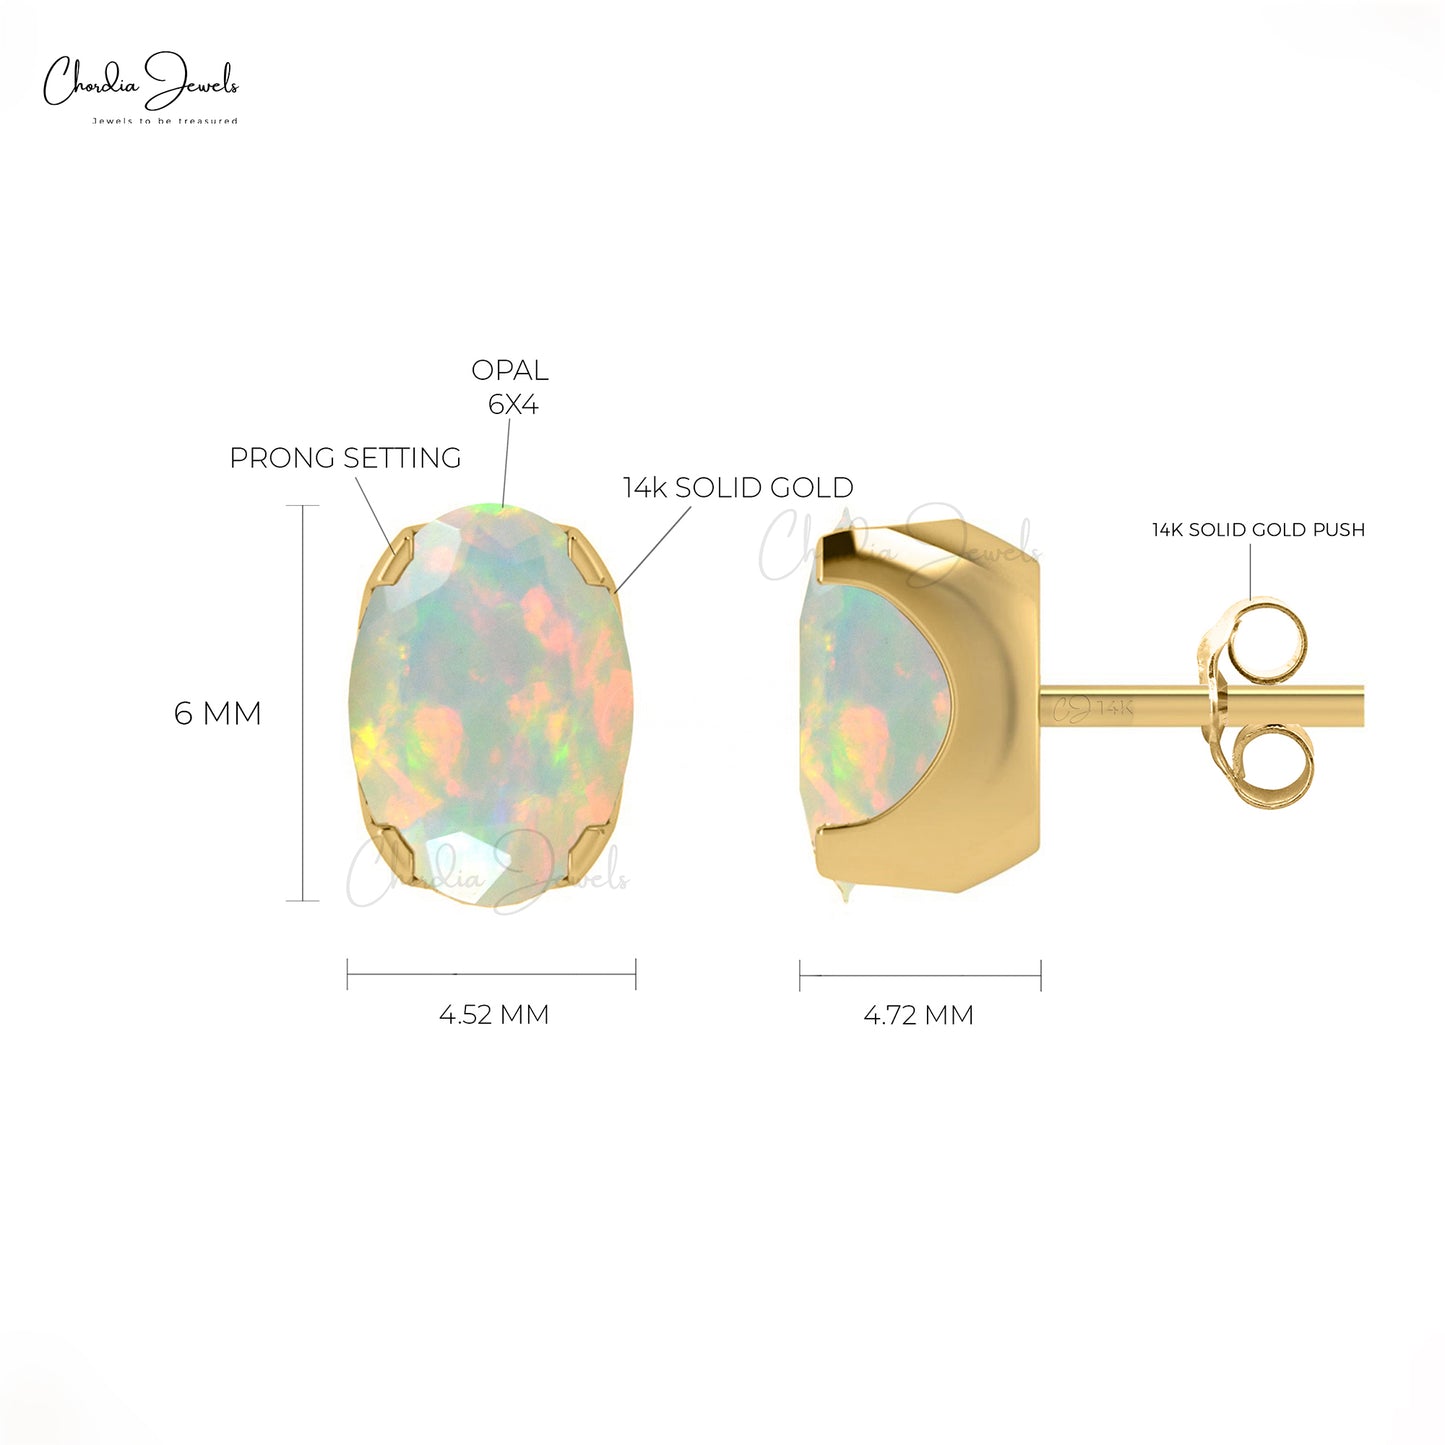 Natural Opal Solitaire Stud Earrings 14k Real Gold Dainty Studs 6x4mm Oval Gemstone Earrings Minimalist Jewelry For Her